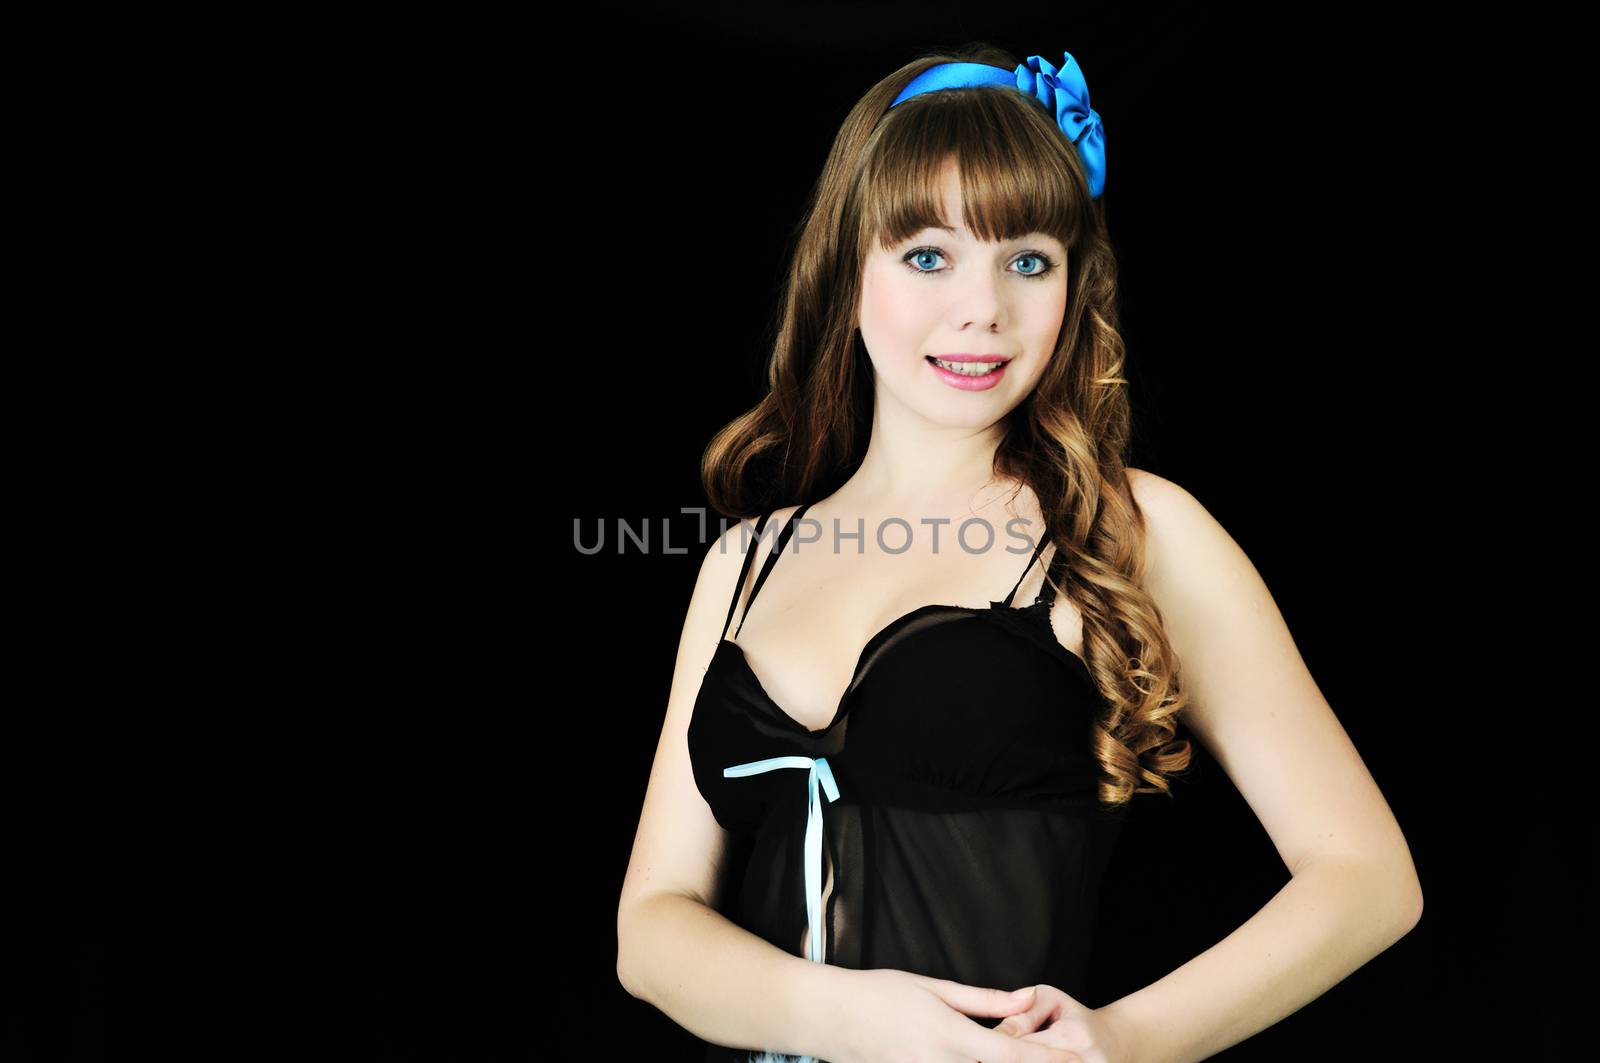 Blue-eyed pin-up sexy girl over black background 